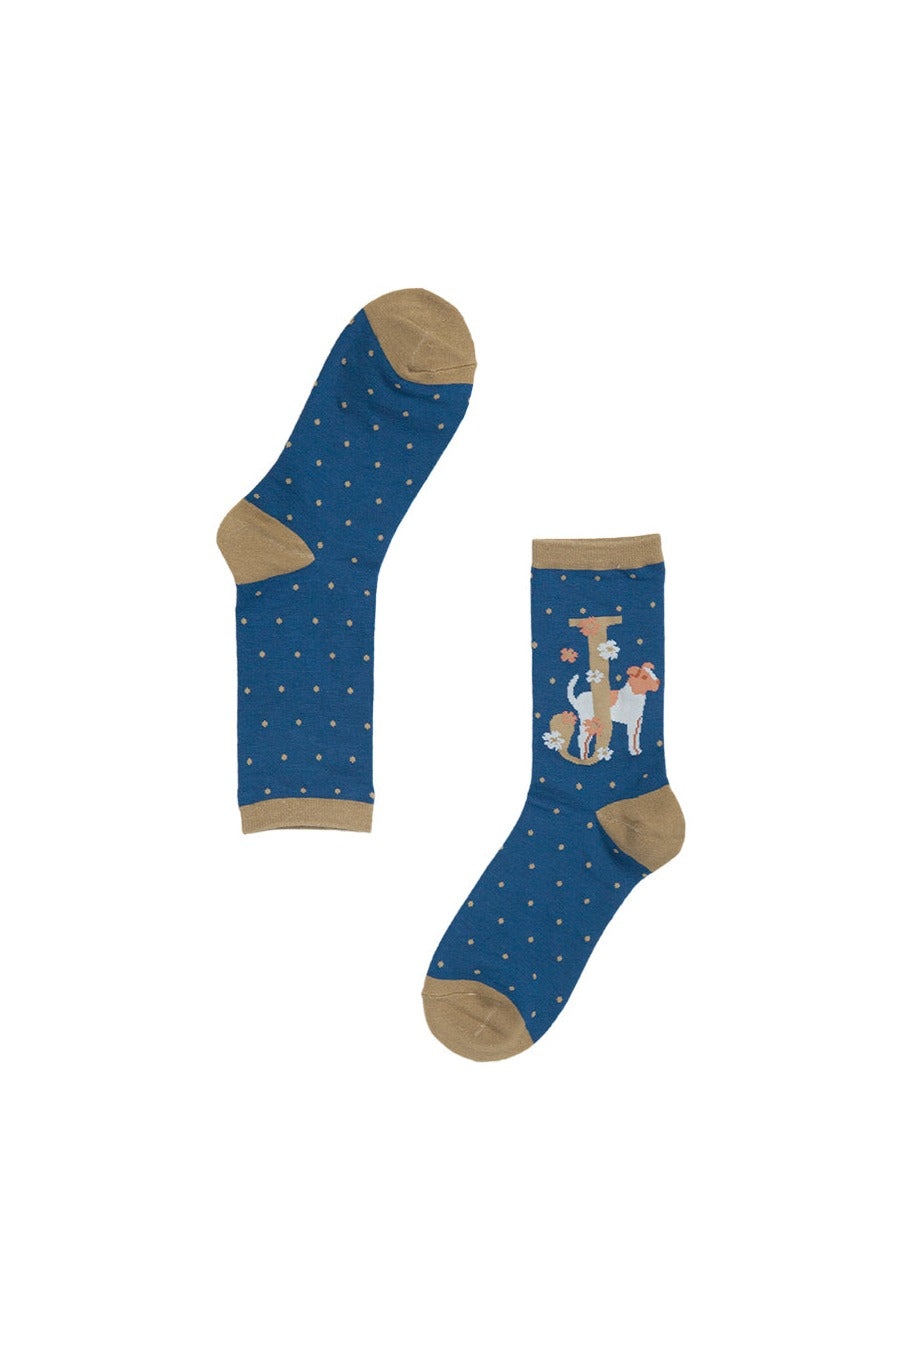 blue bamboo socks with the initial J